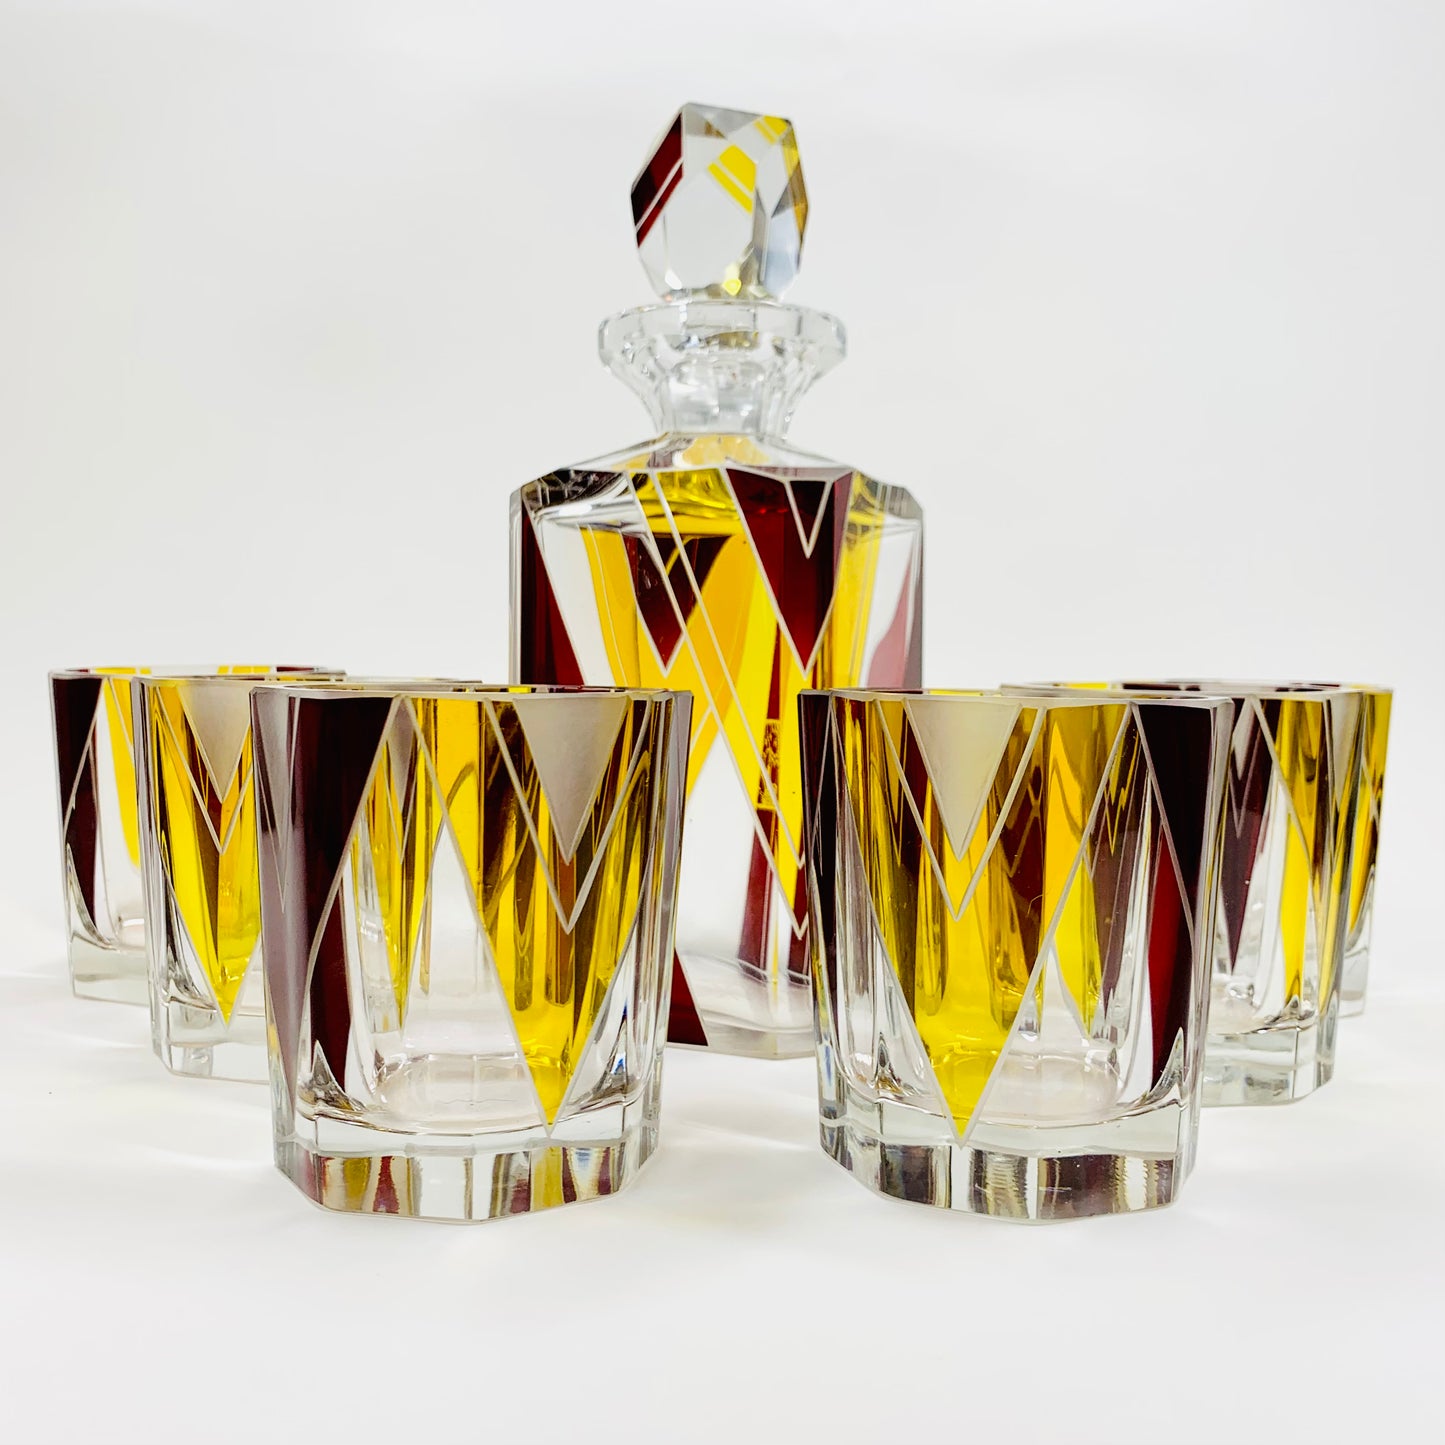 Extremely extremely rare antique Art Deco ruby & gold enamel glass decanter set by Karl Palda